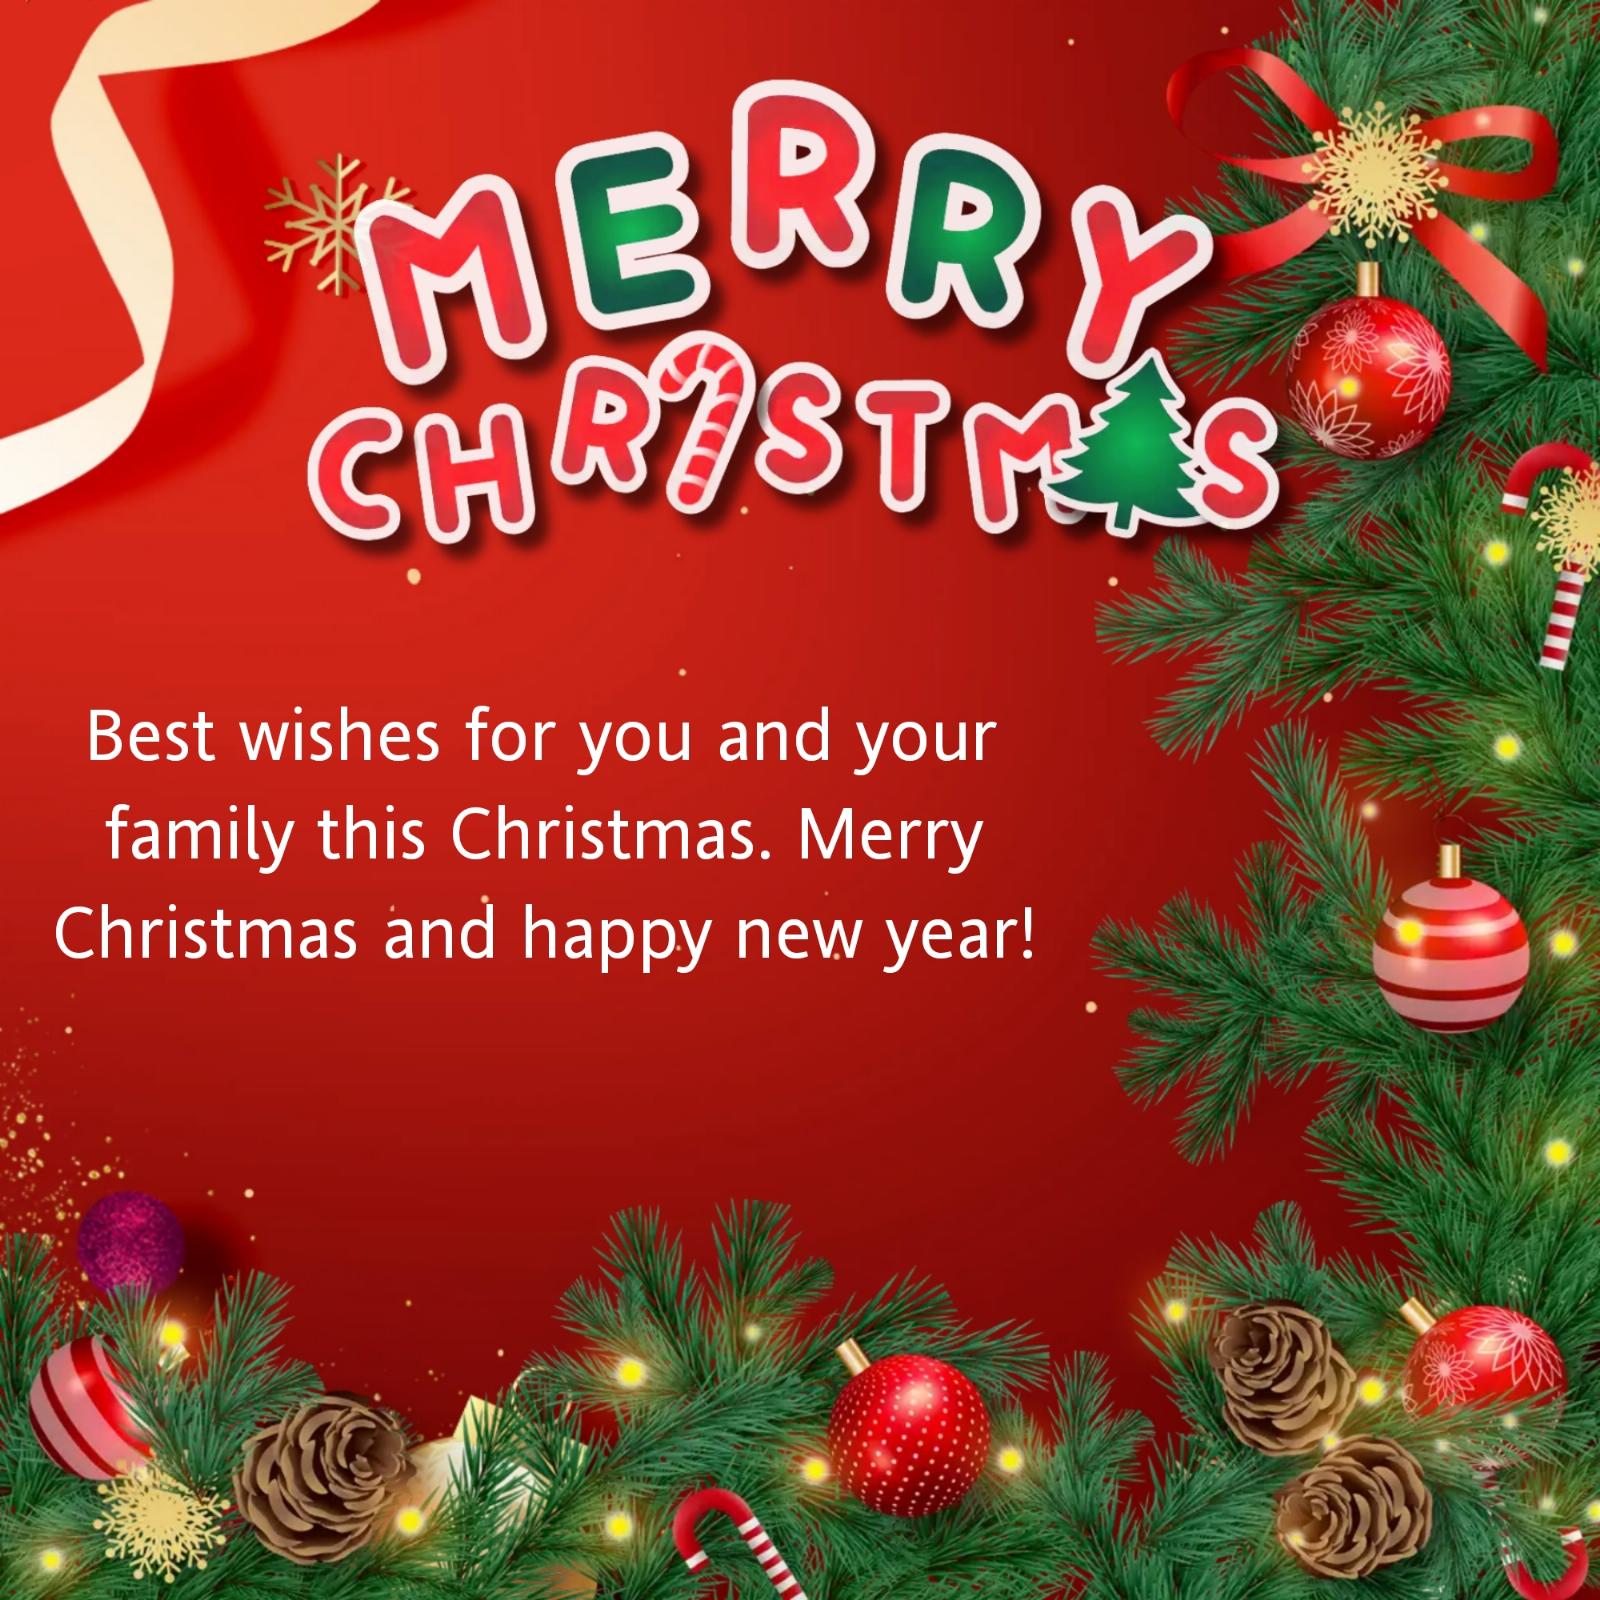 Best wishes for you and your family this Christmas